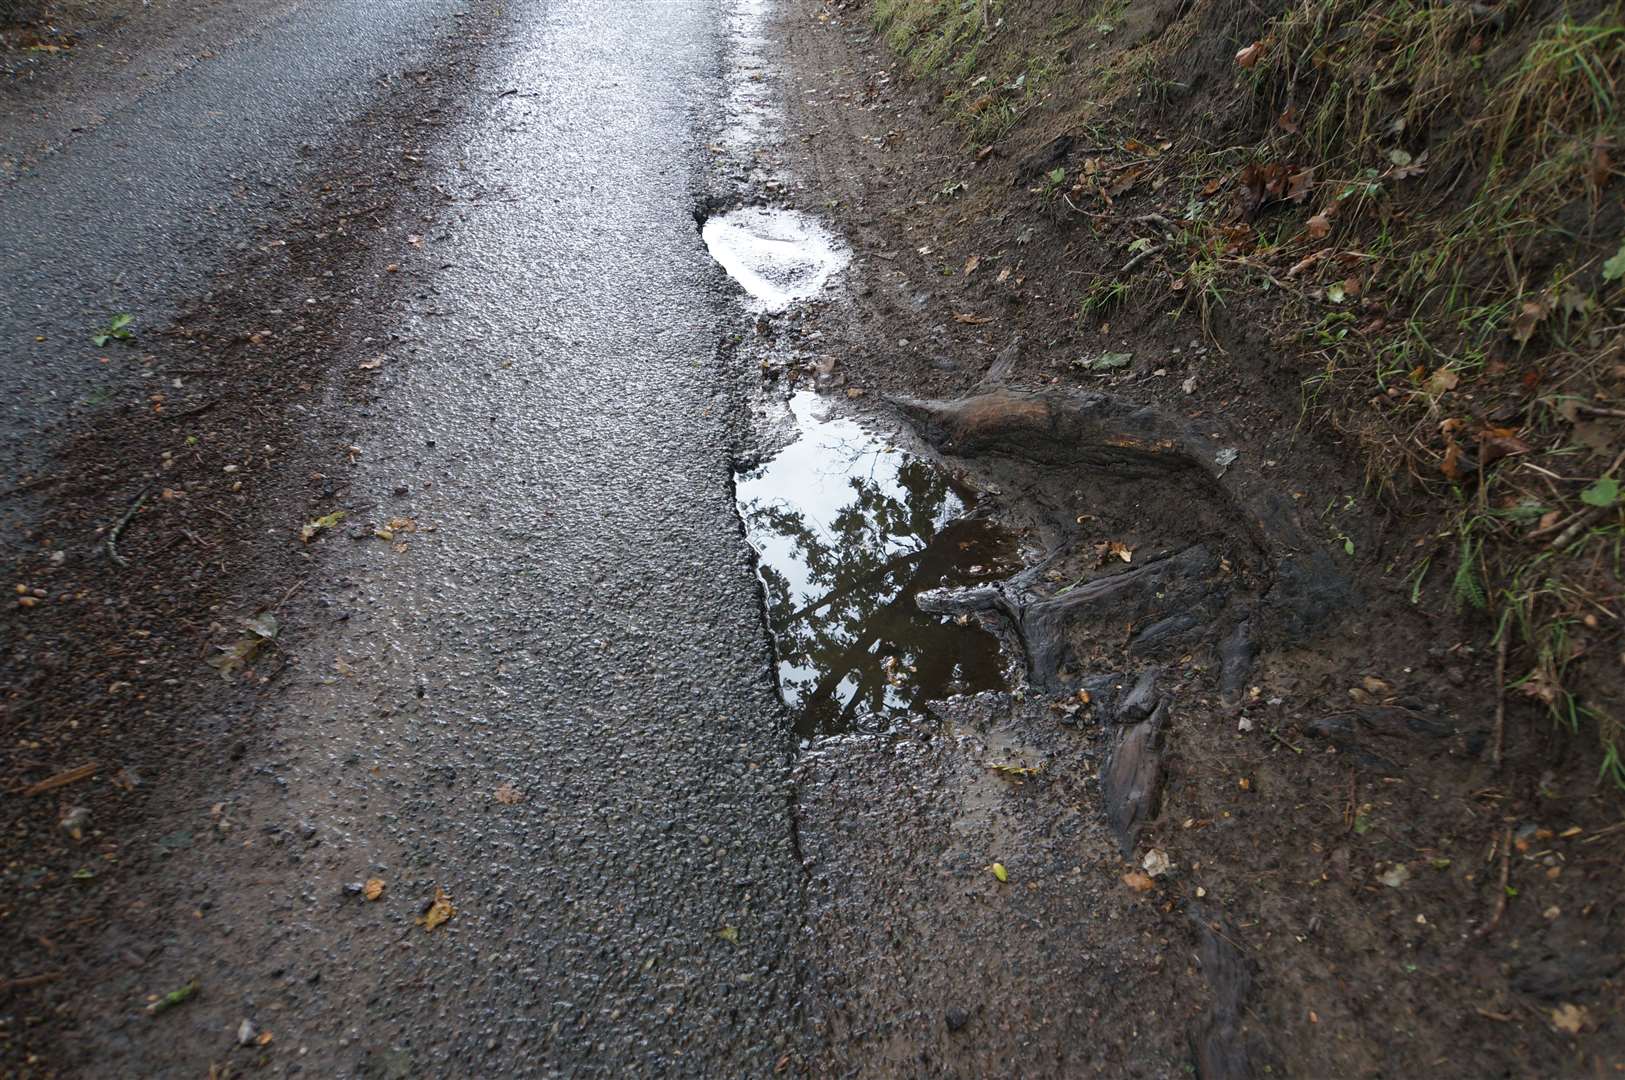 Potholes can damage your car - but prove lethal to those on two wheels